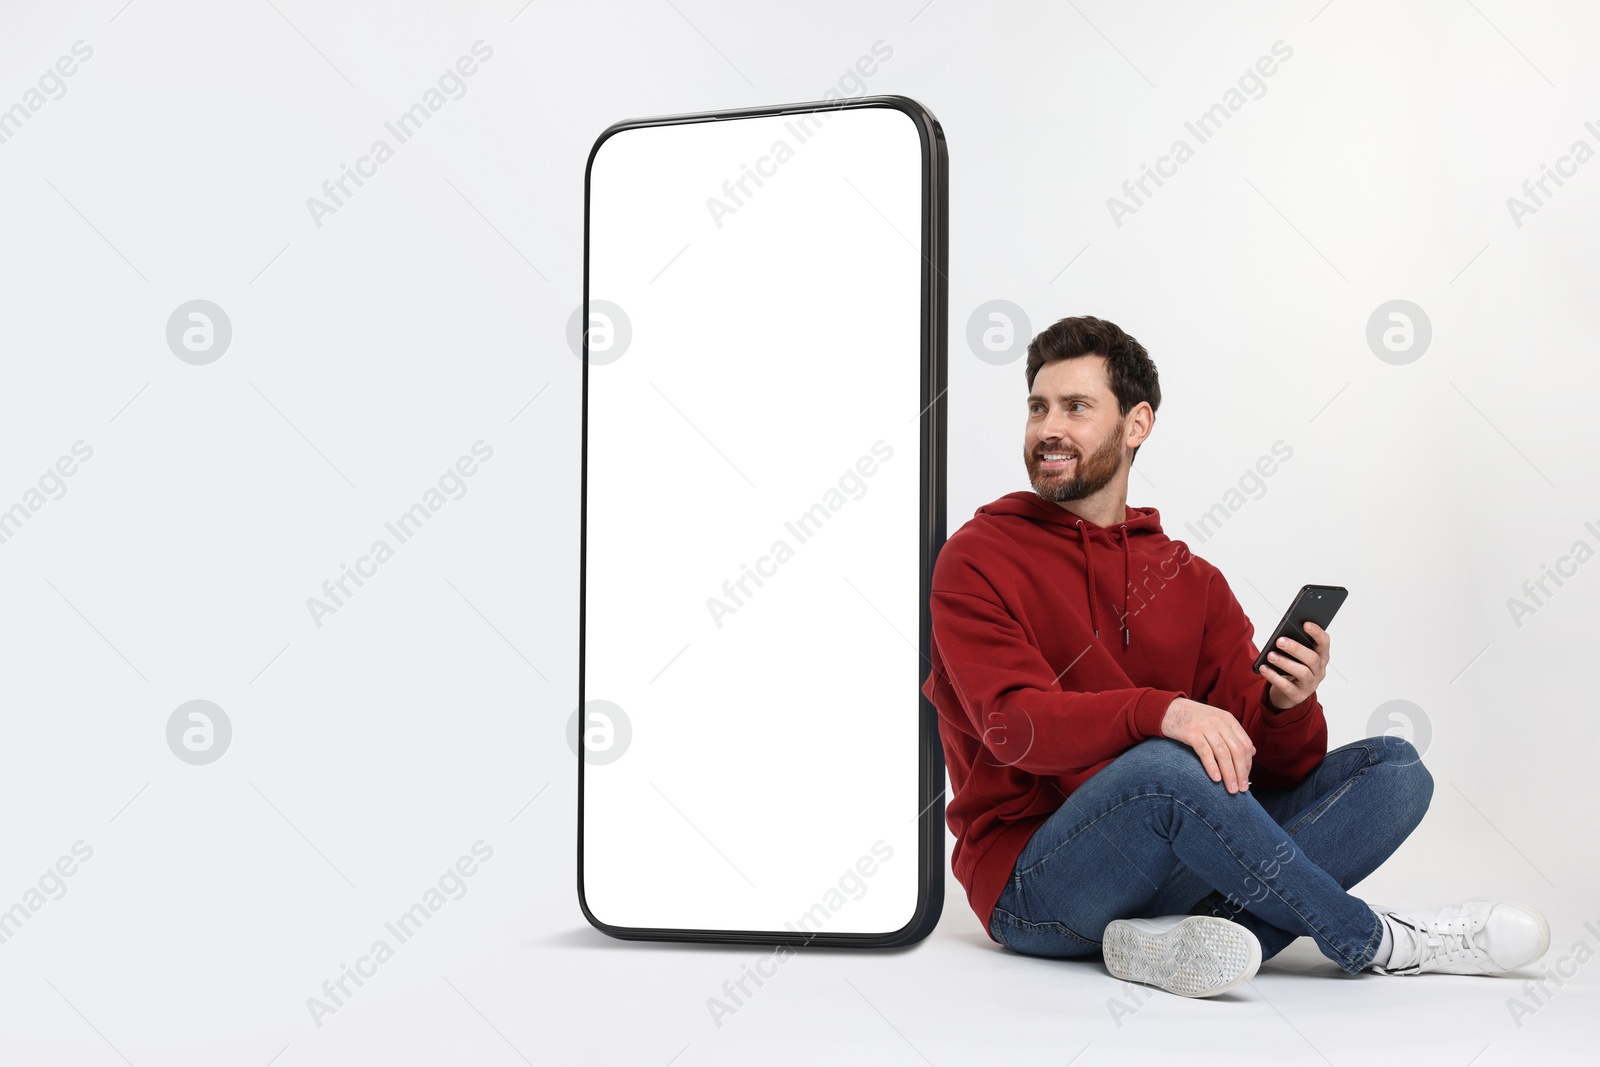 Image of Man with mobile phone sitting near huge device with empty screen on white background. Mockup for design